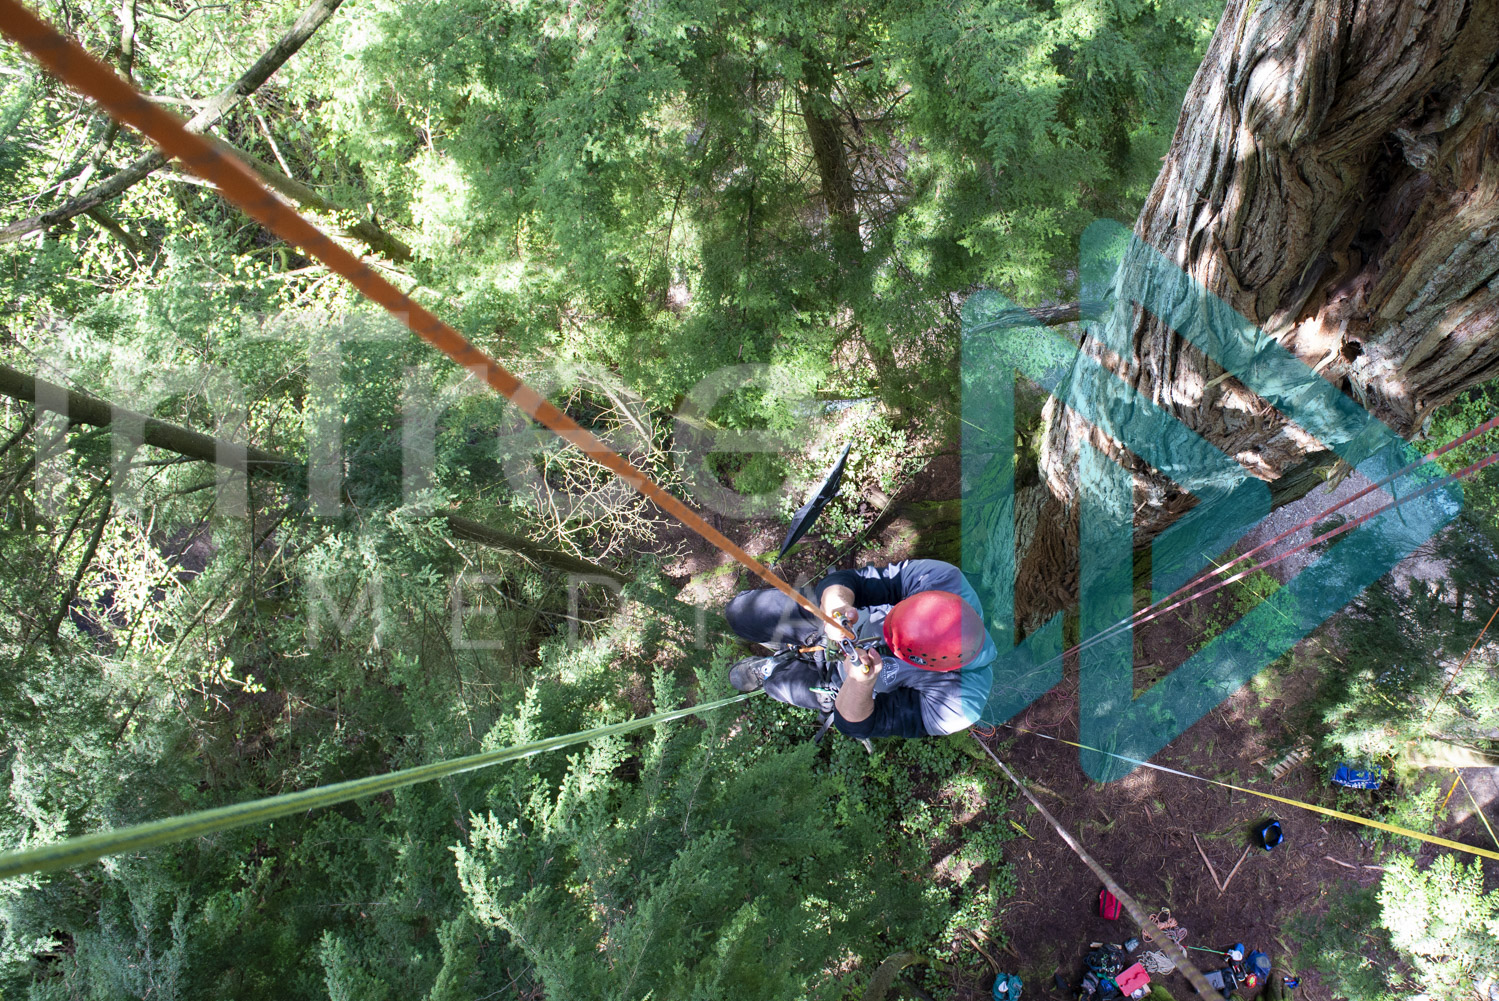 Looking down ropes to Climbing Arborist ascending rope into canopy - Arborist Stock Photo 001-21-6903